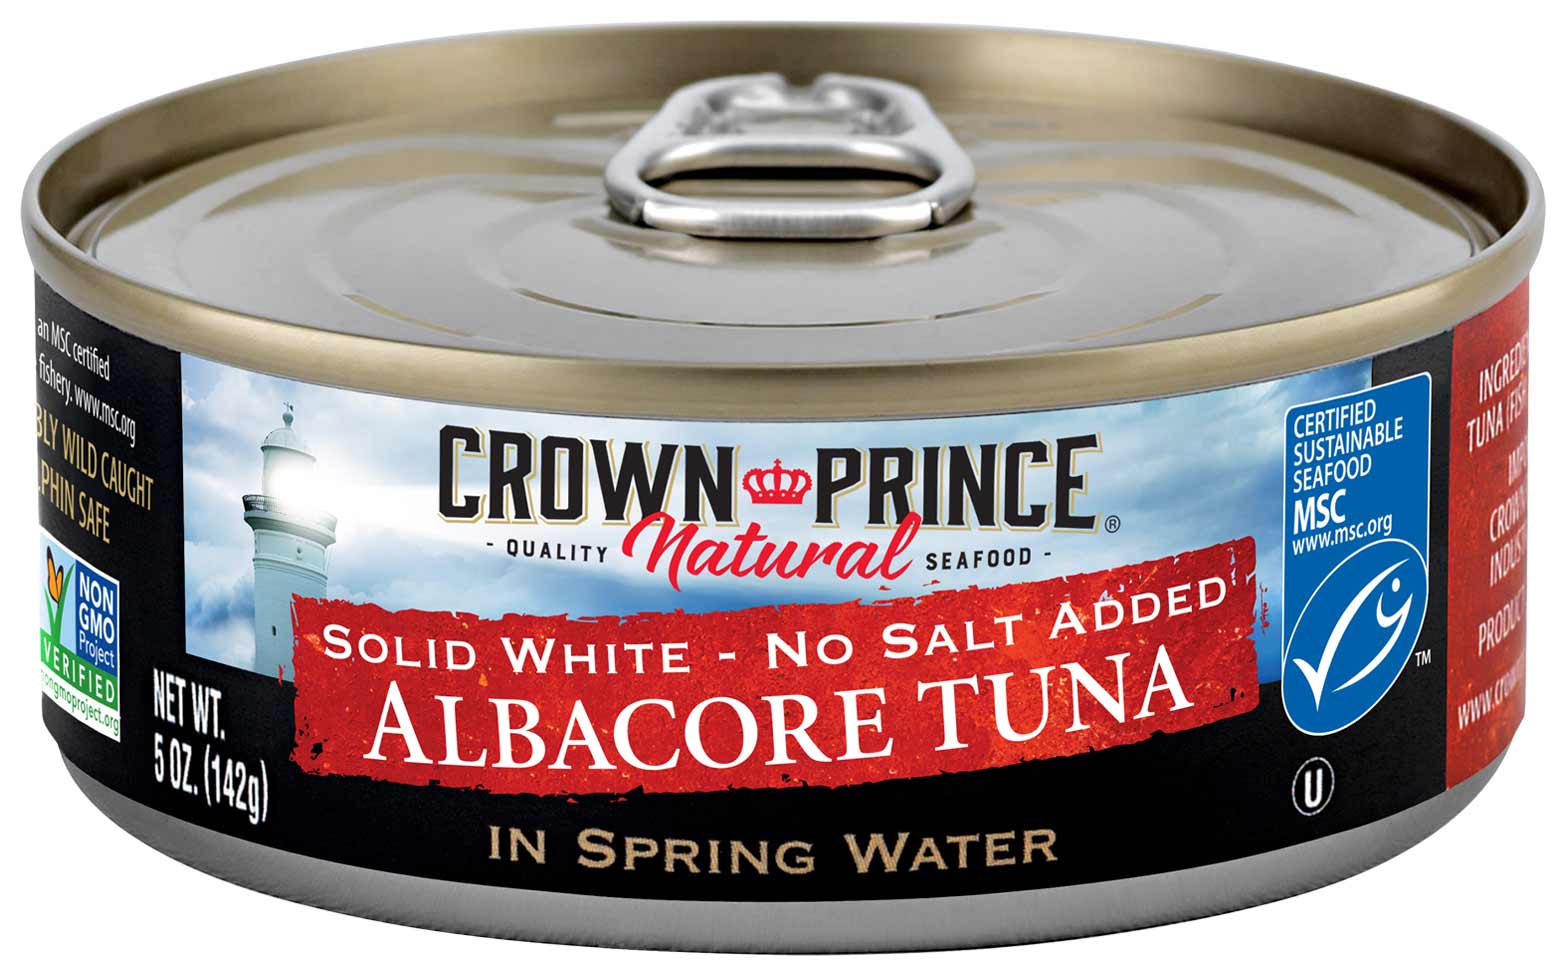 Crown Prince Natural Solid White Albacore Tuna in Spring Water - No Salt Added